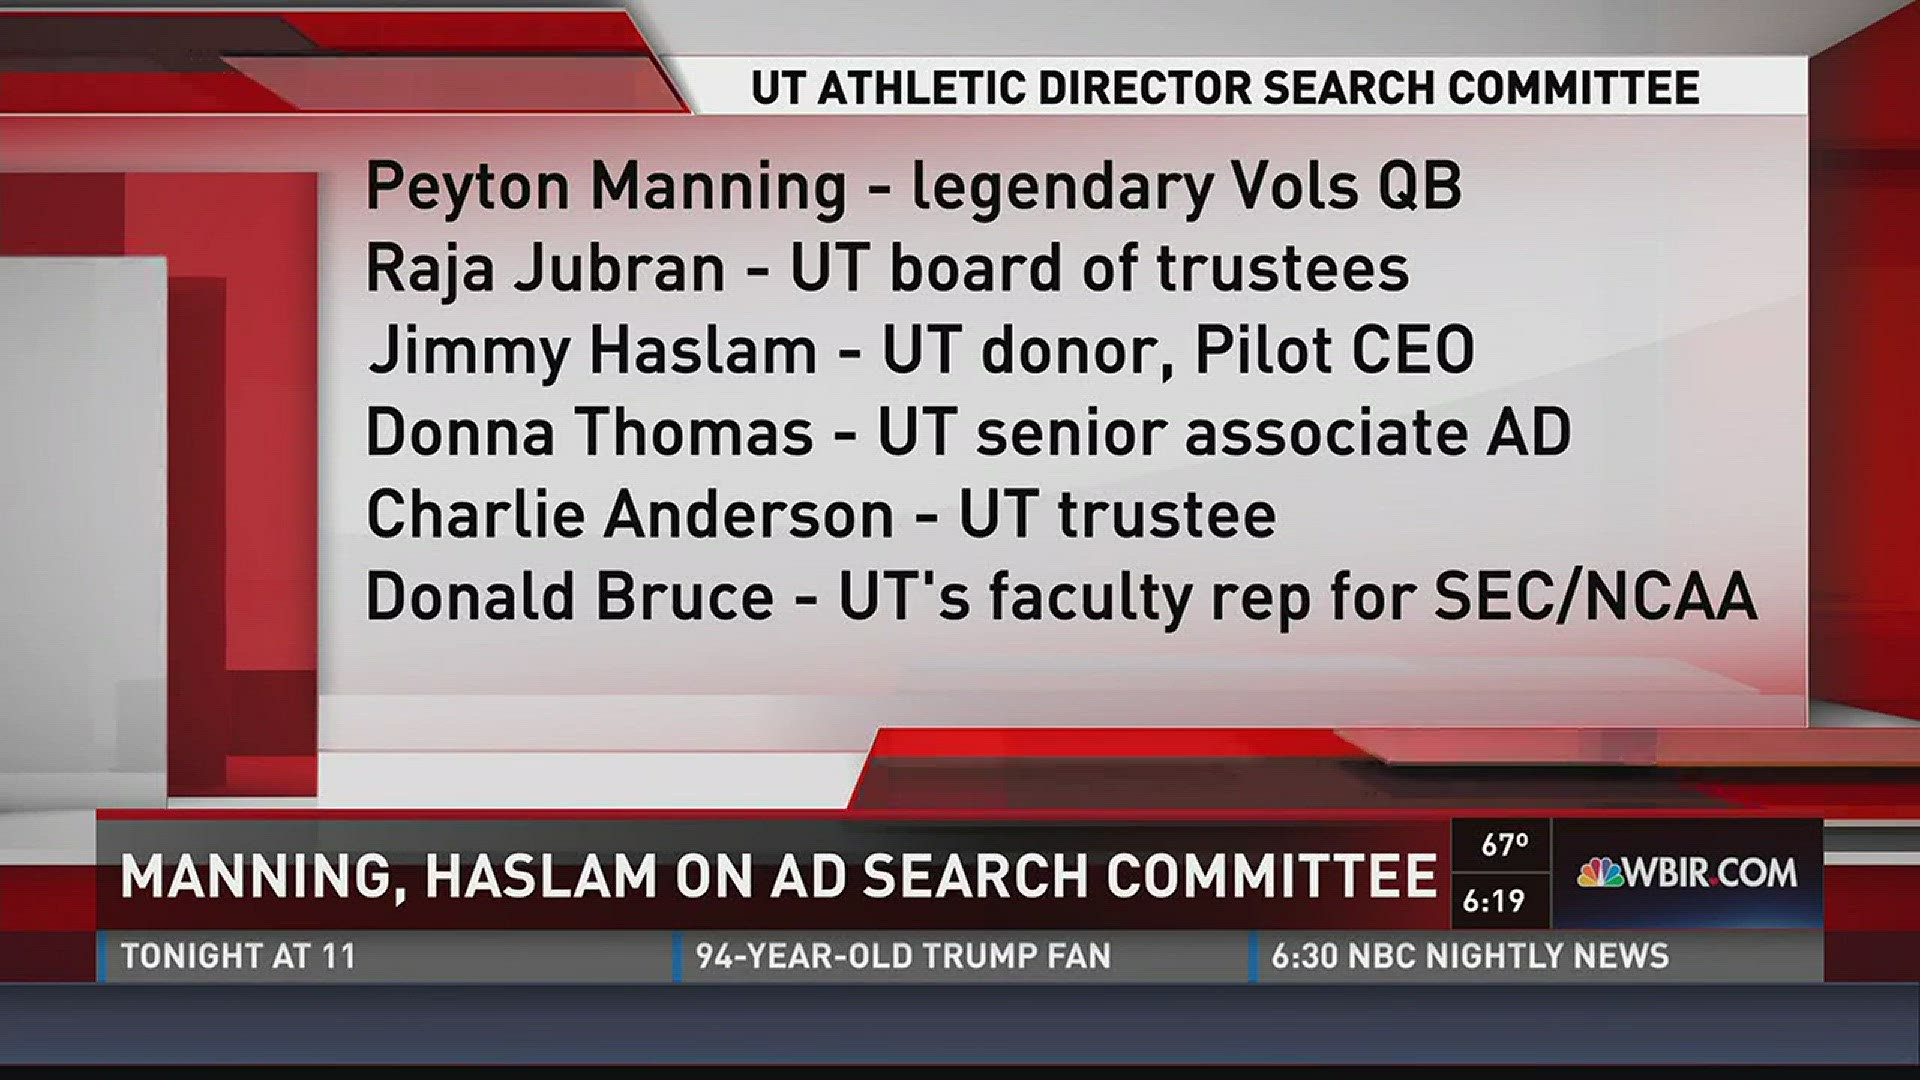 Jan. 20, 2017: Peyton Manning is one member of a six-person committee assembled by Chancellor Beverly Davenport to advise her during UT's search for an athletic director.